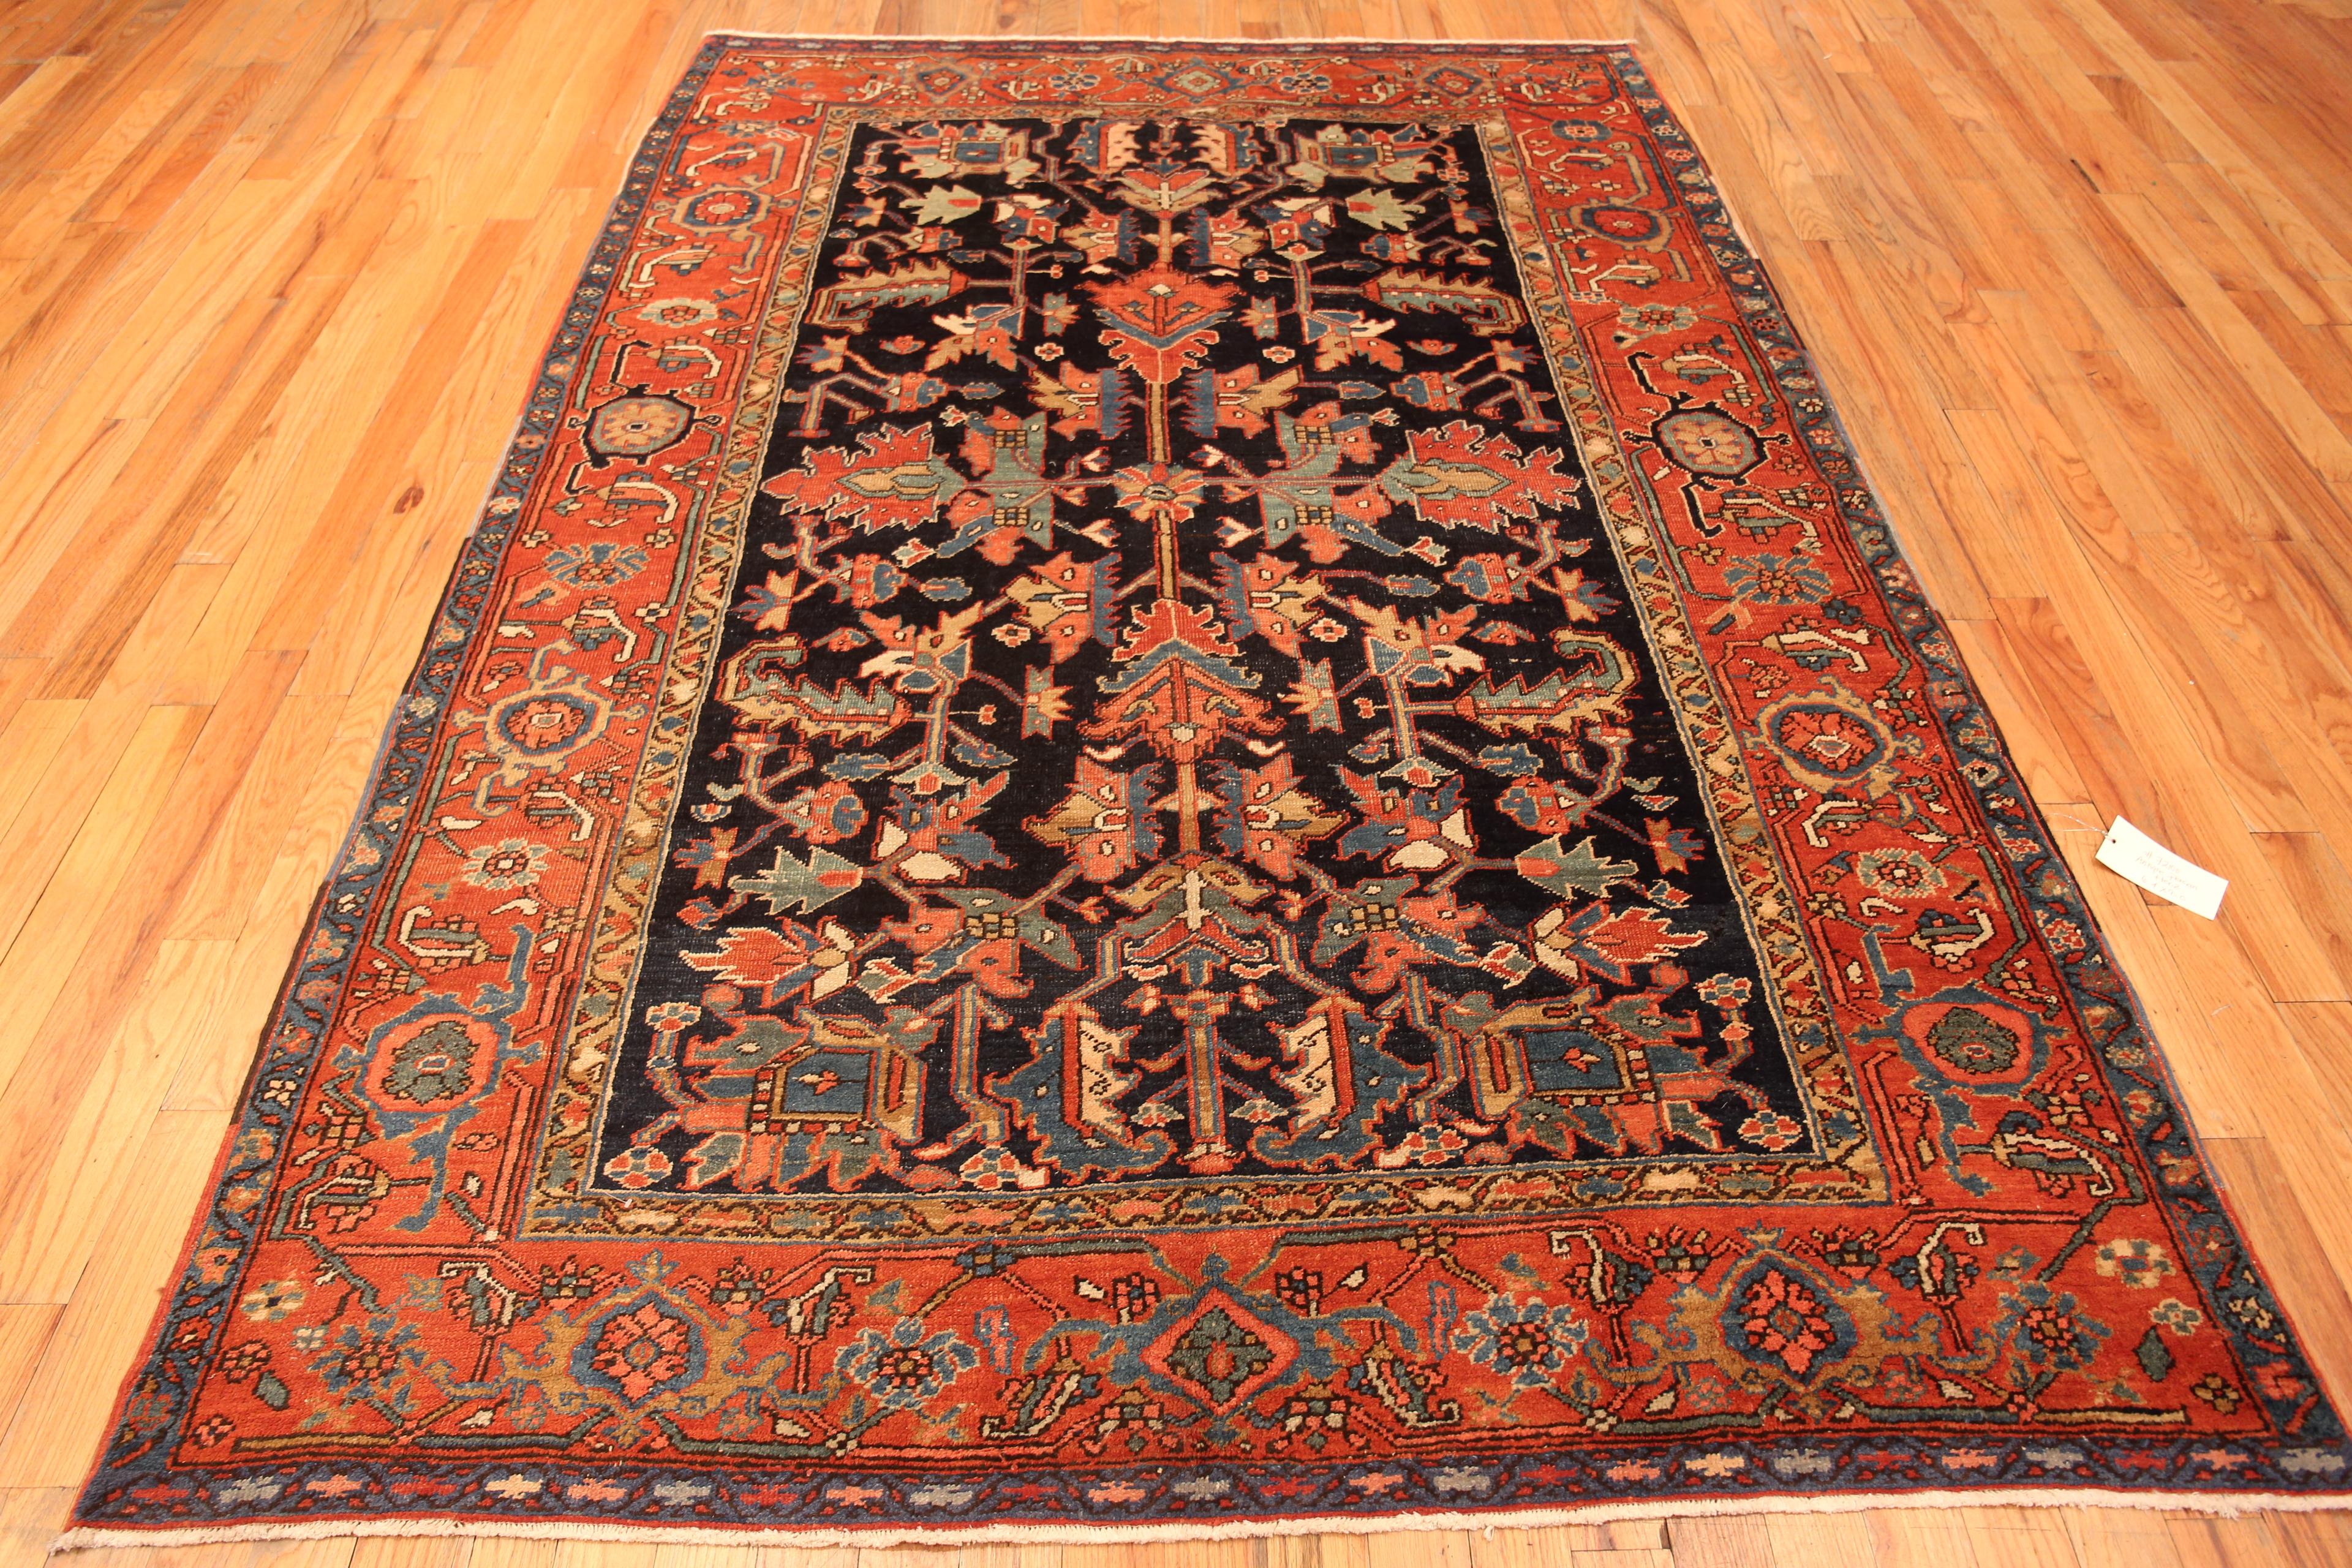 Rustic Tribal Navy Blue Background Antique Allover Persian Heriz Rug, Country of Origin: Persia, Circa date: 1920. Size: 6 ft 4 in x 9 ft (1.93 m x 2.74 m)

